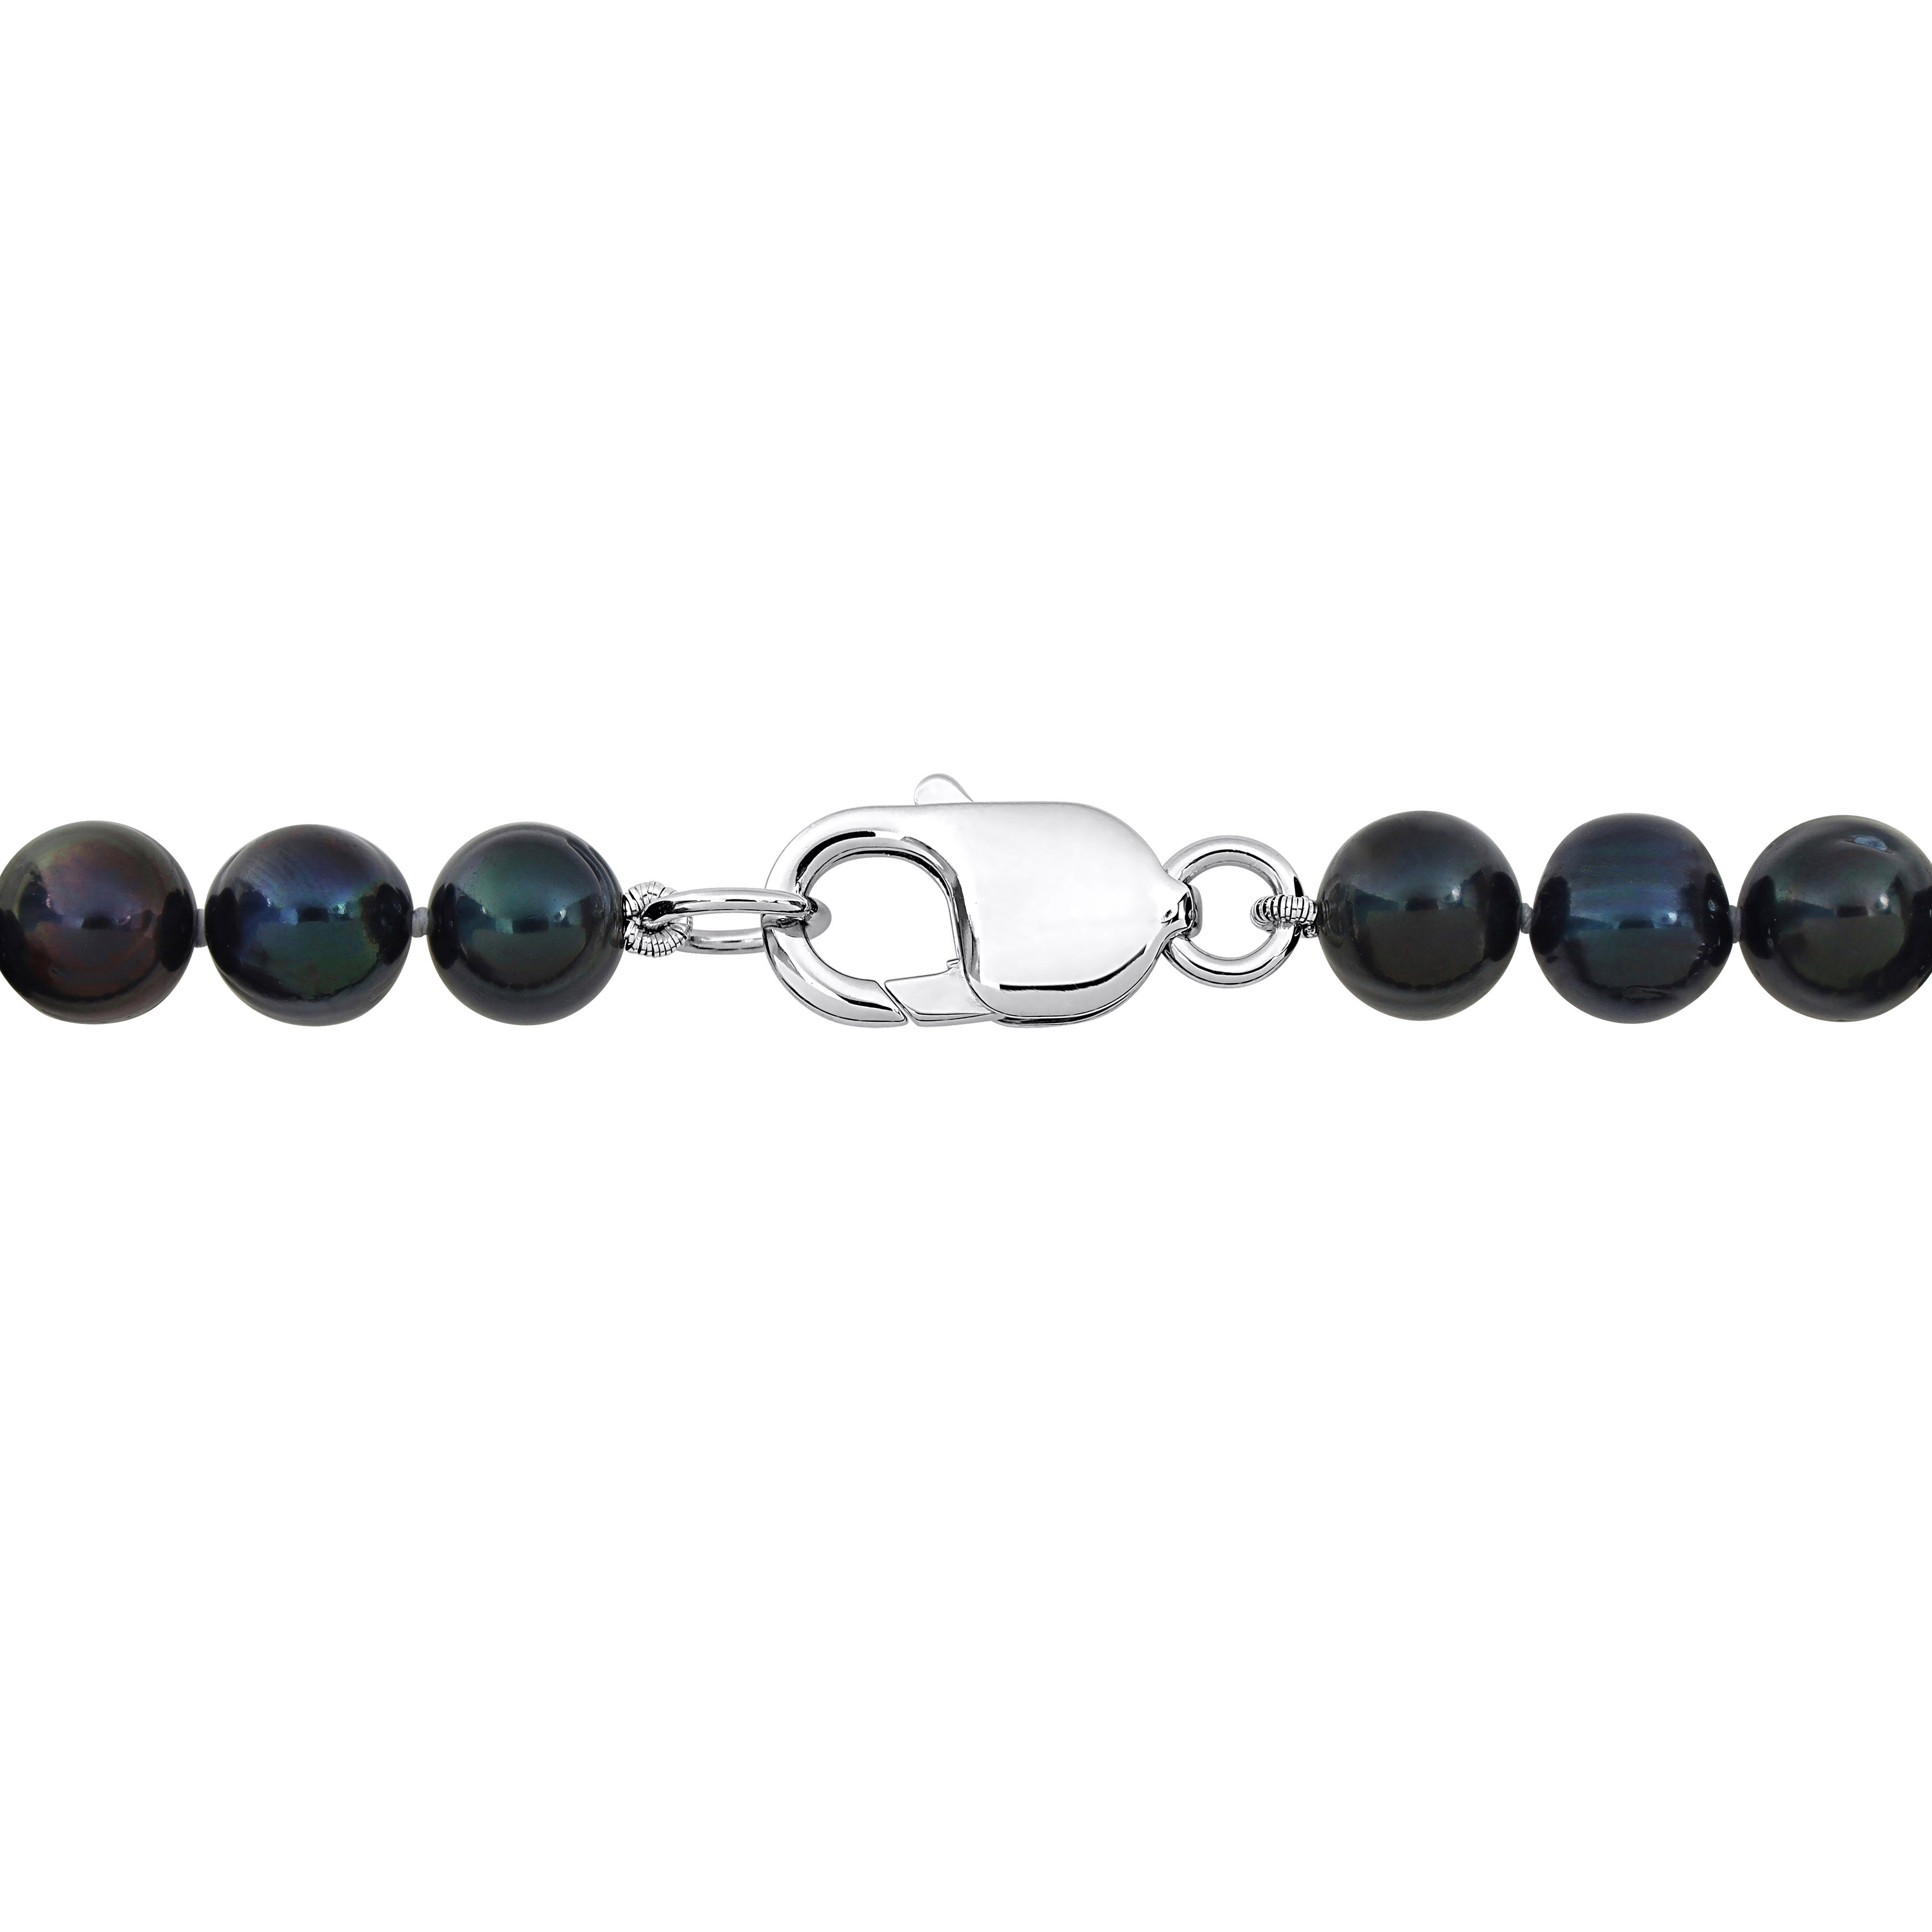 8-8.5mm Men's Black Freshwater Cultured Pearl String Bracelet with Sterling Silver Lobster Clasp - 9 in.